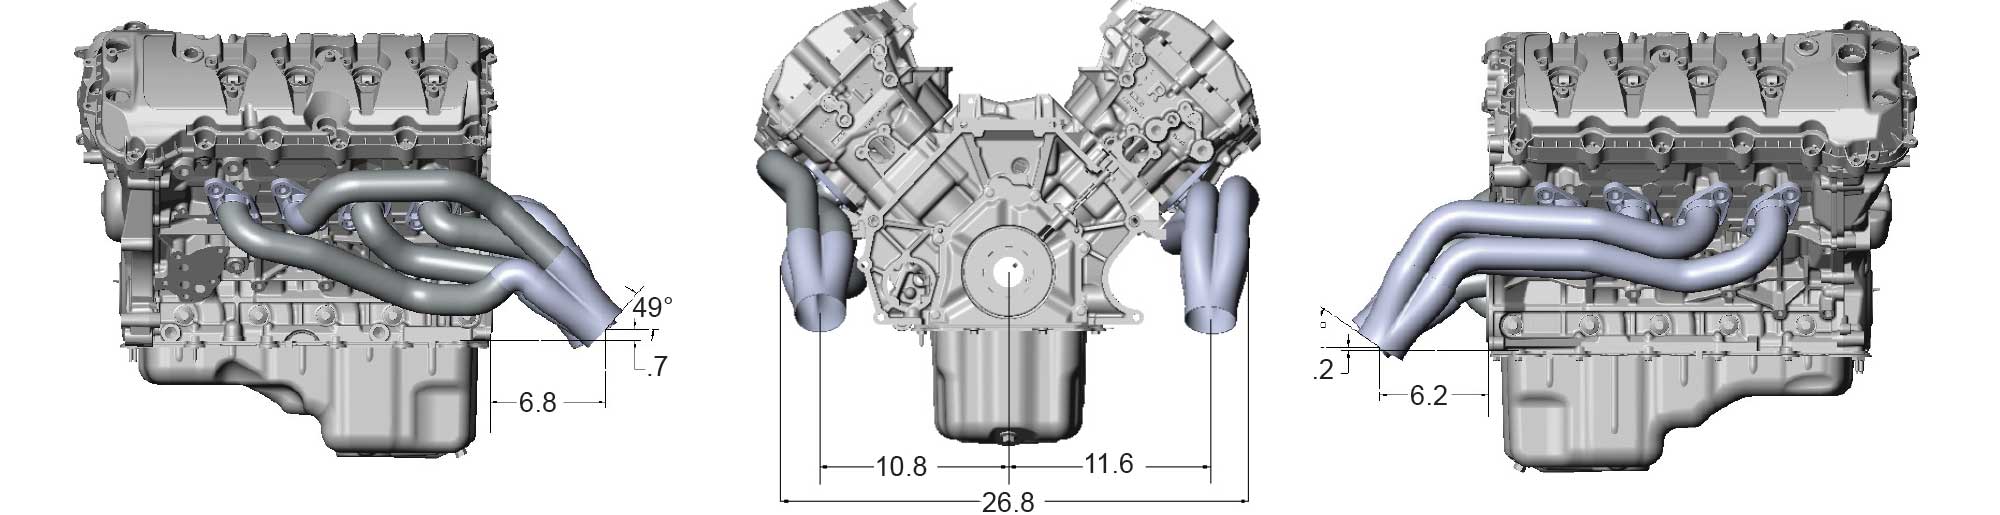 Ford Coyote Engine Dimensions | My XXX Hot Girl